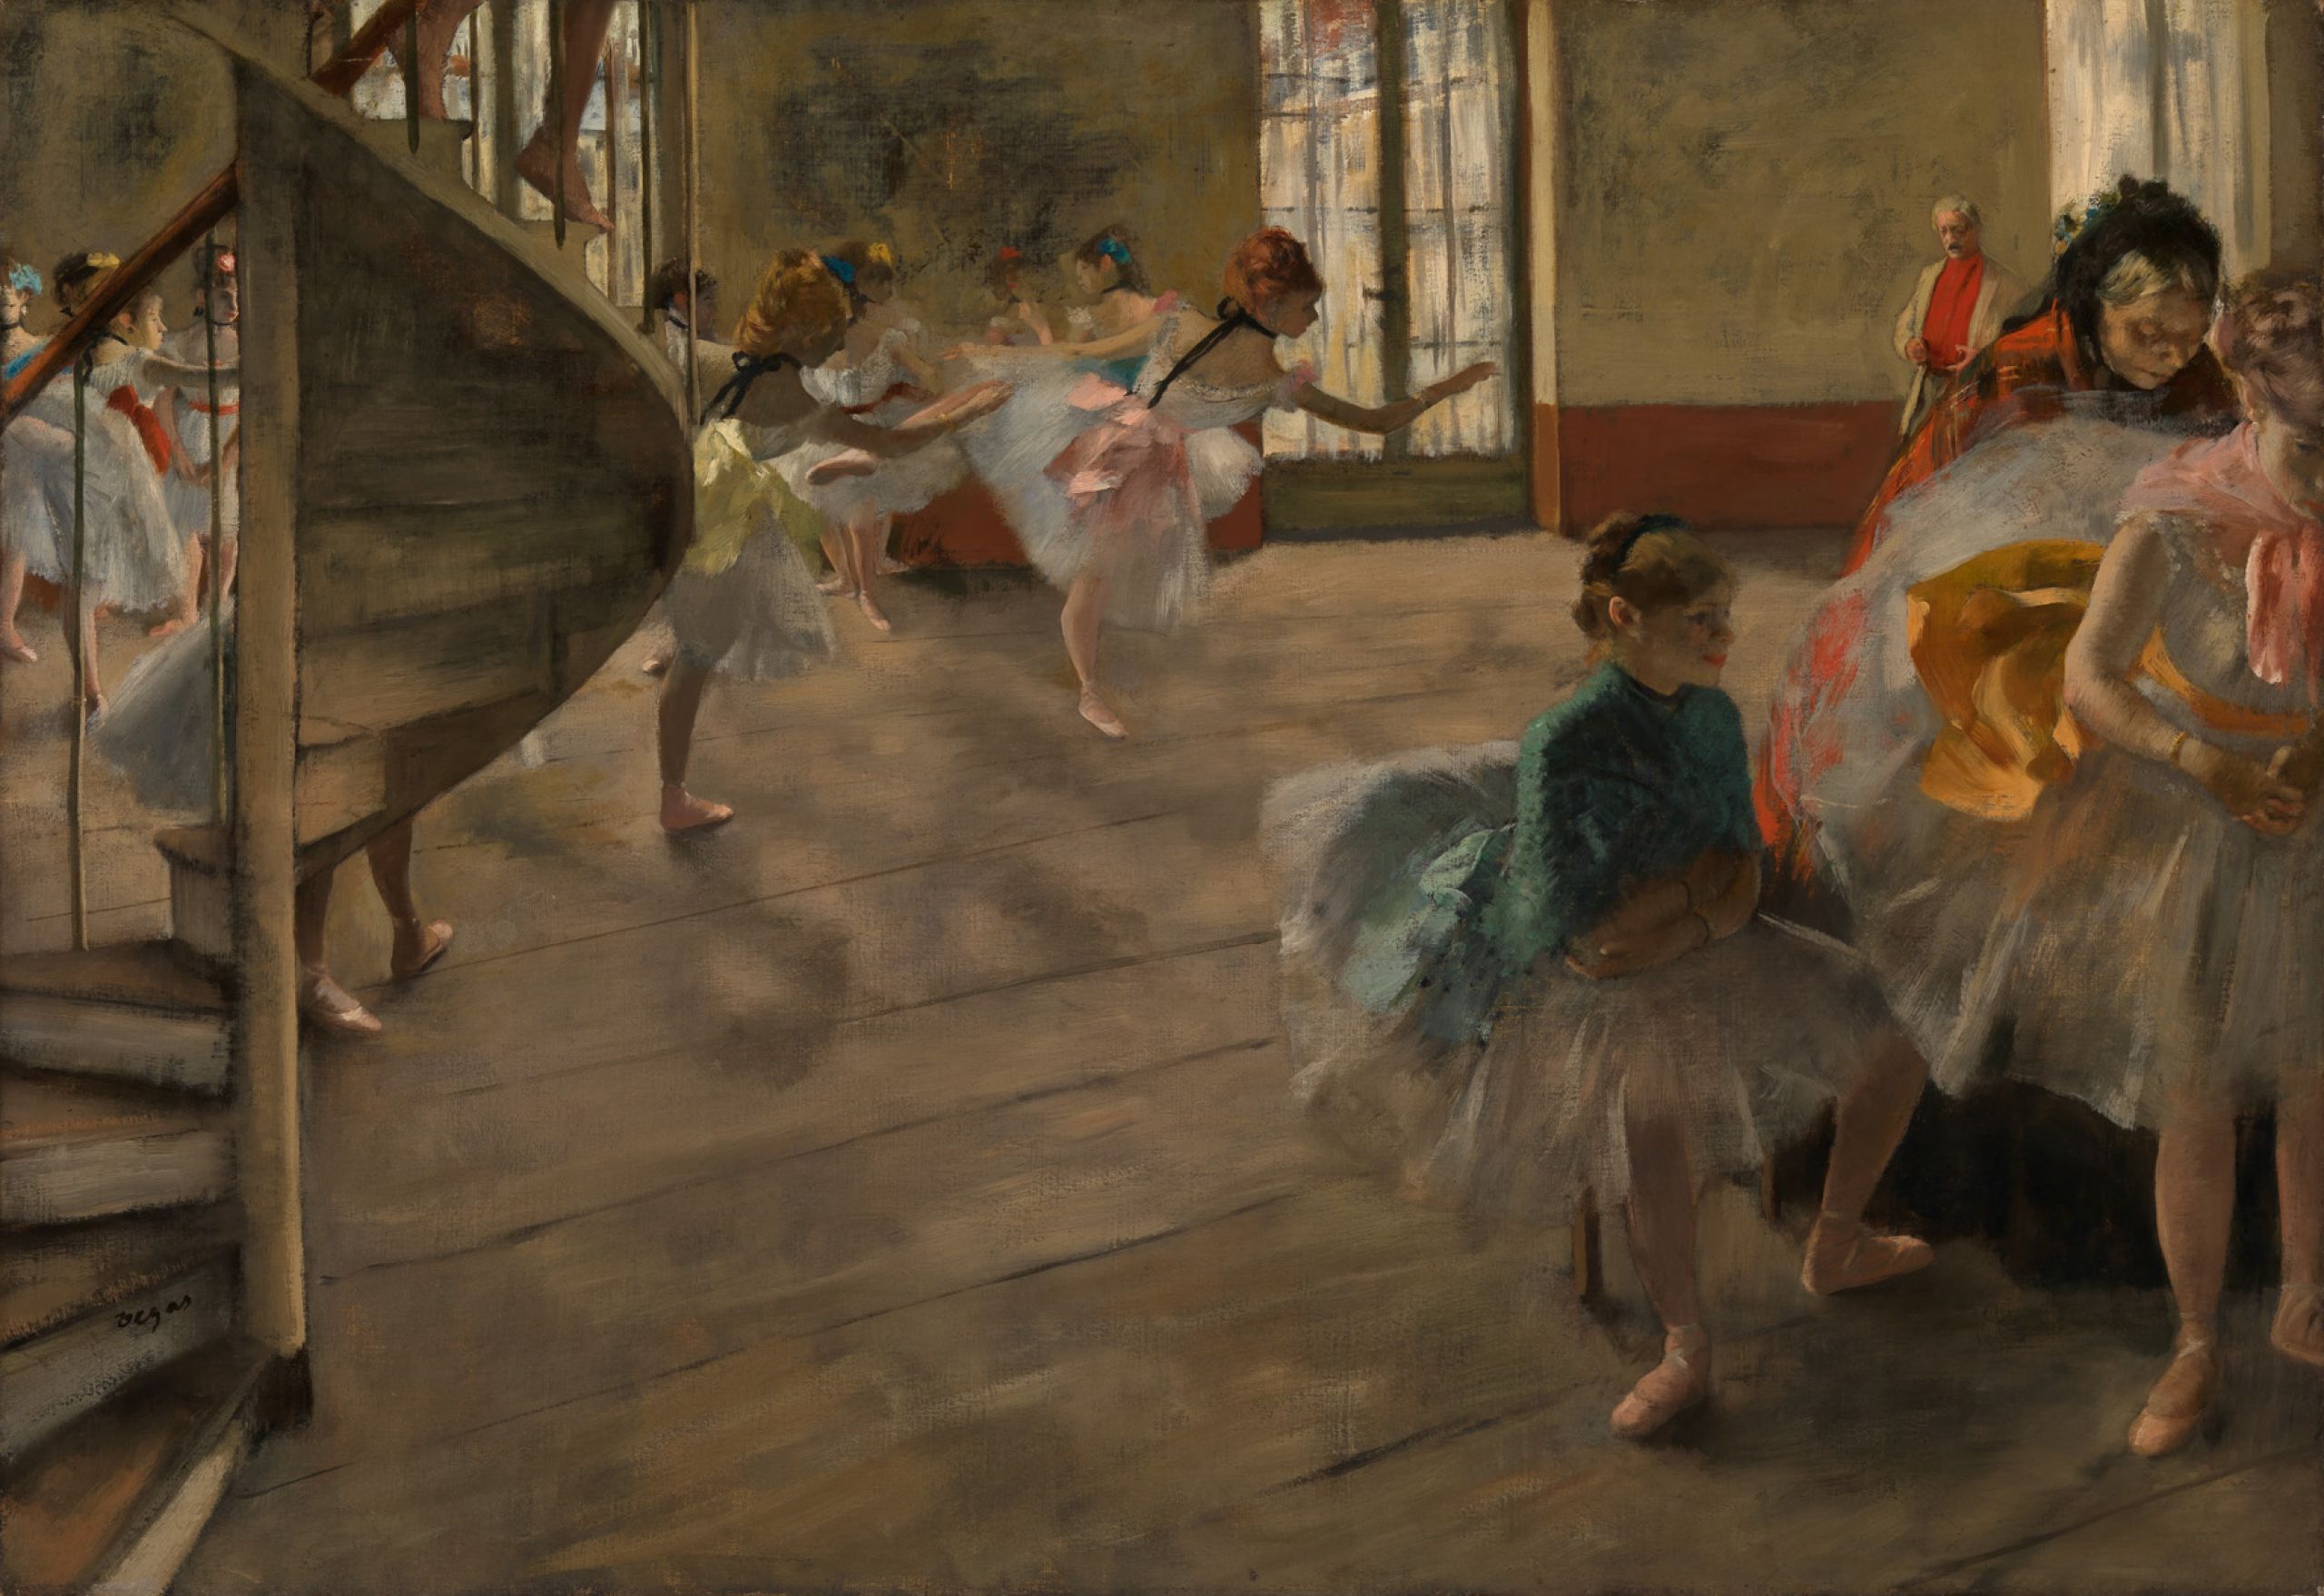 Drawn In Colour Degas From The Burrell Dances Into The National Gallery This Autumn Creative Boom 